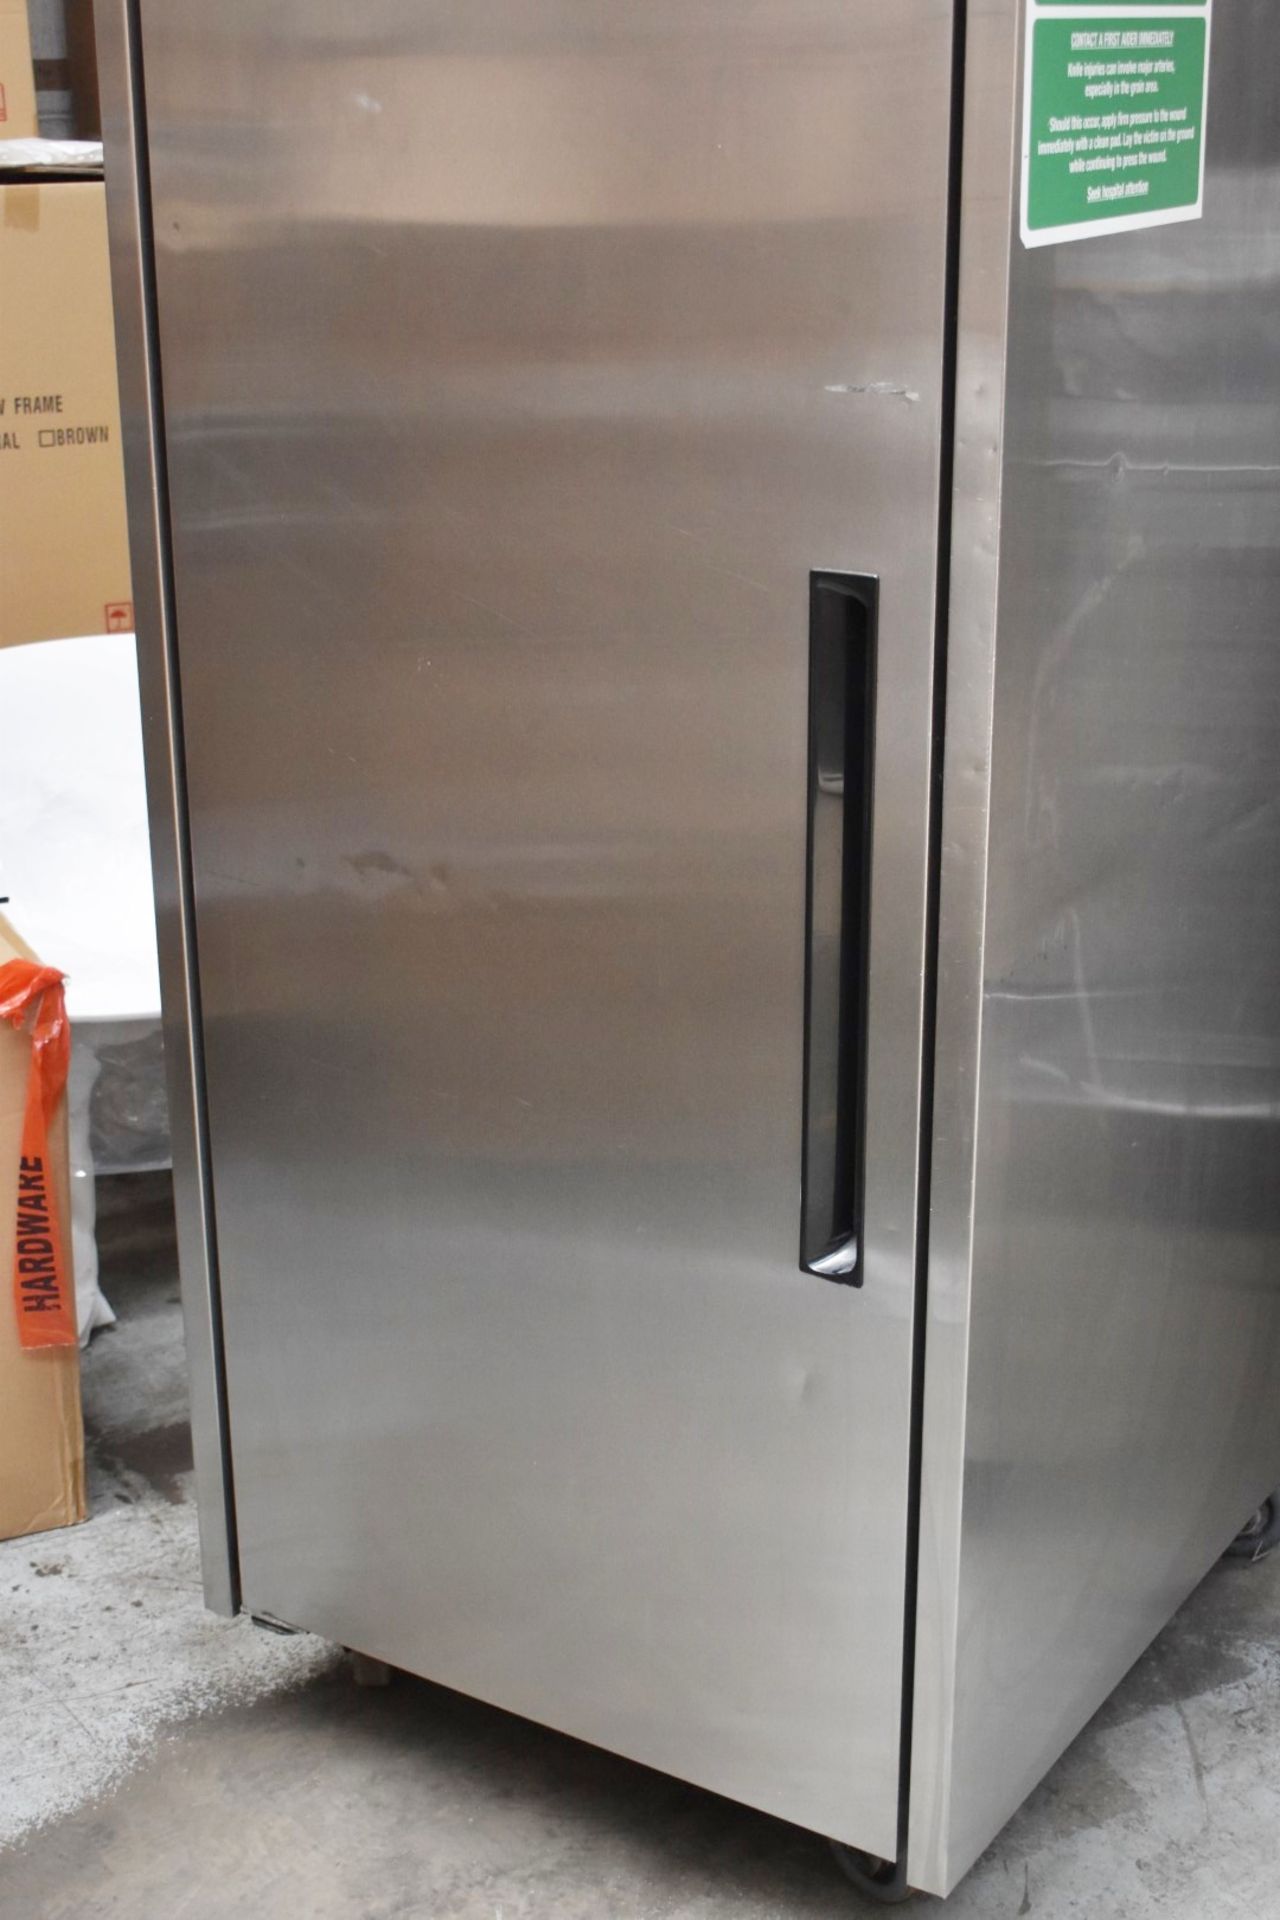 1 x Williams Upright Single Door Refrigerator With Stainless Steel Exterior - Model HJ1TSA - Image 2 of 10